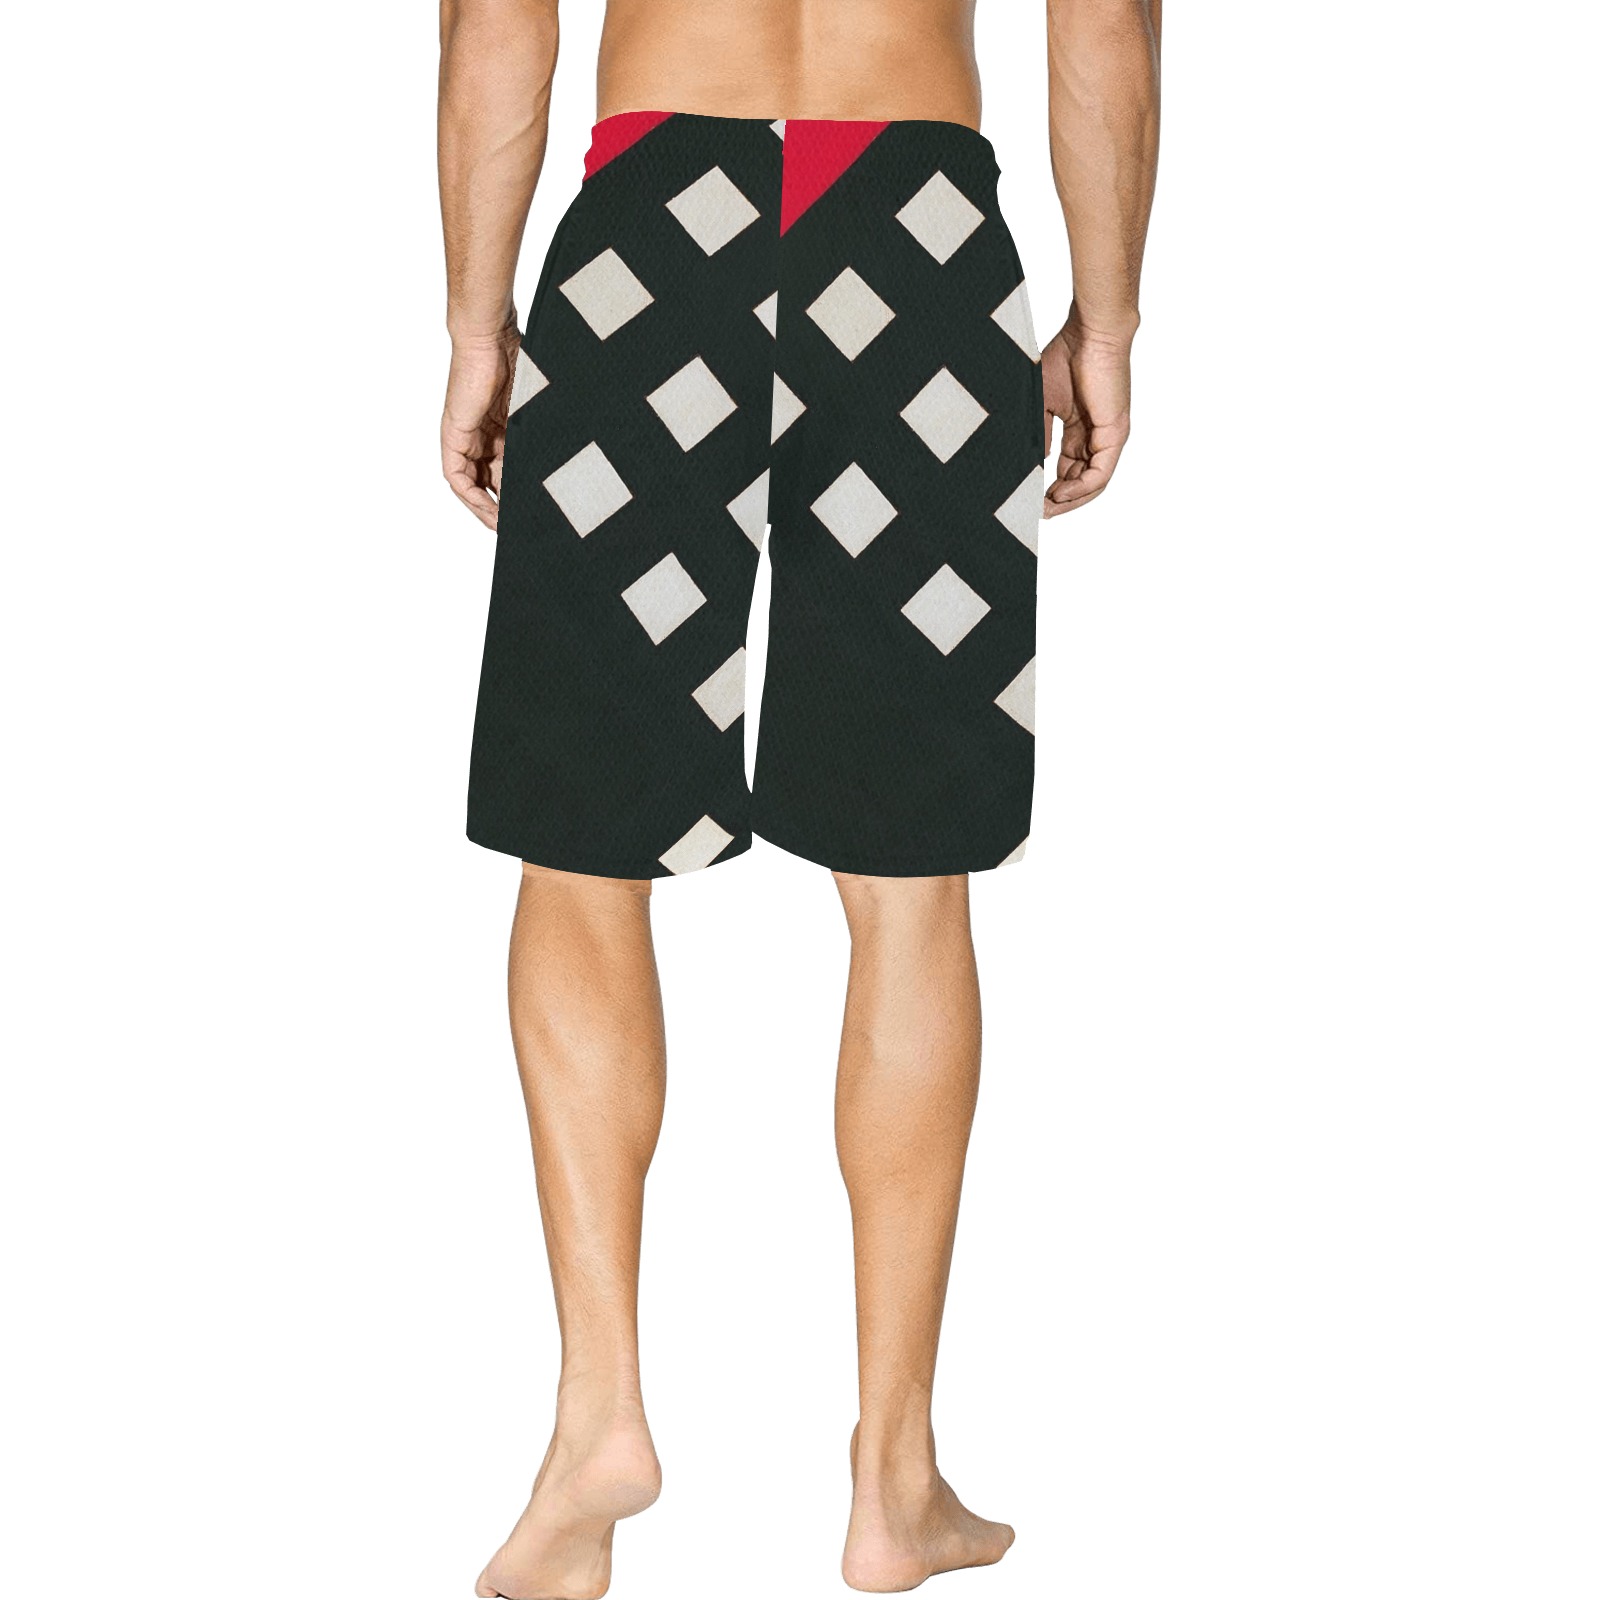 Counter-composition XV by Theo van Doesburg- All Over Print Basketball Shorts with Pocket